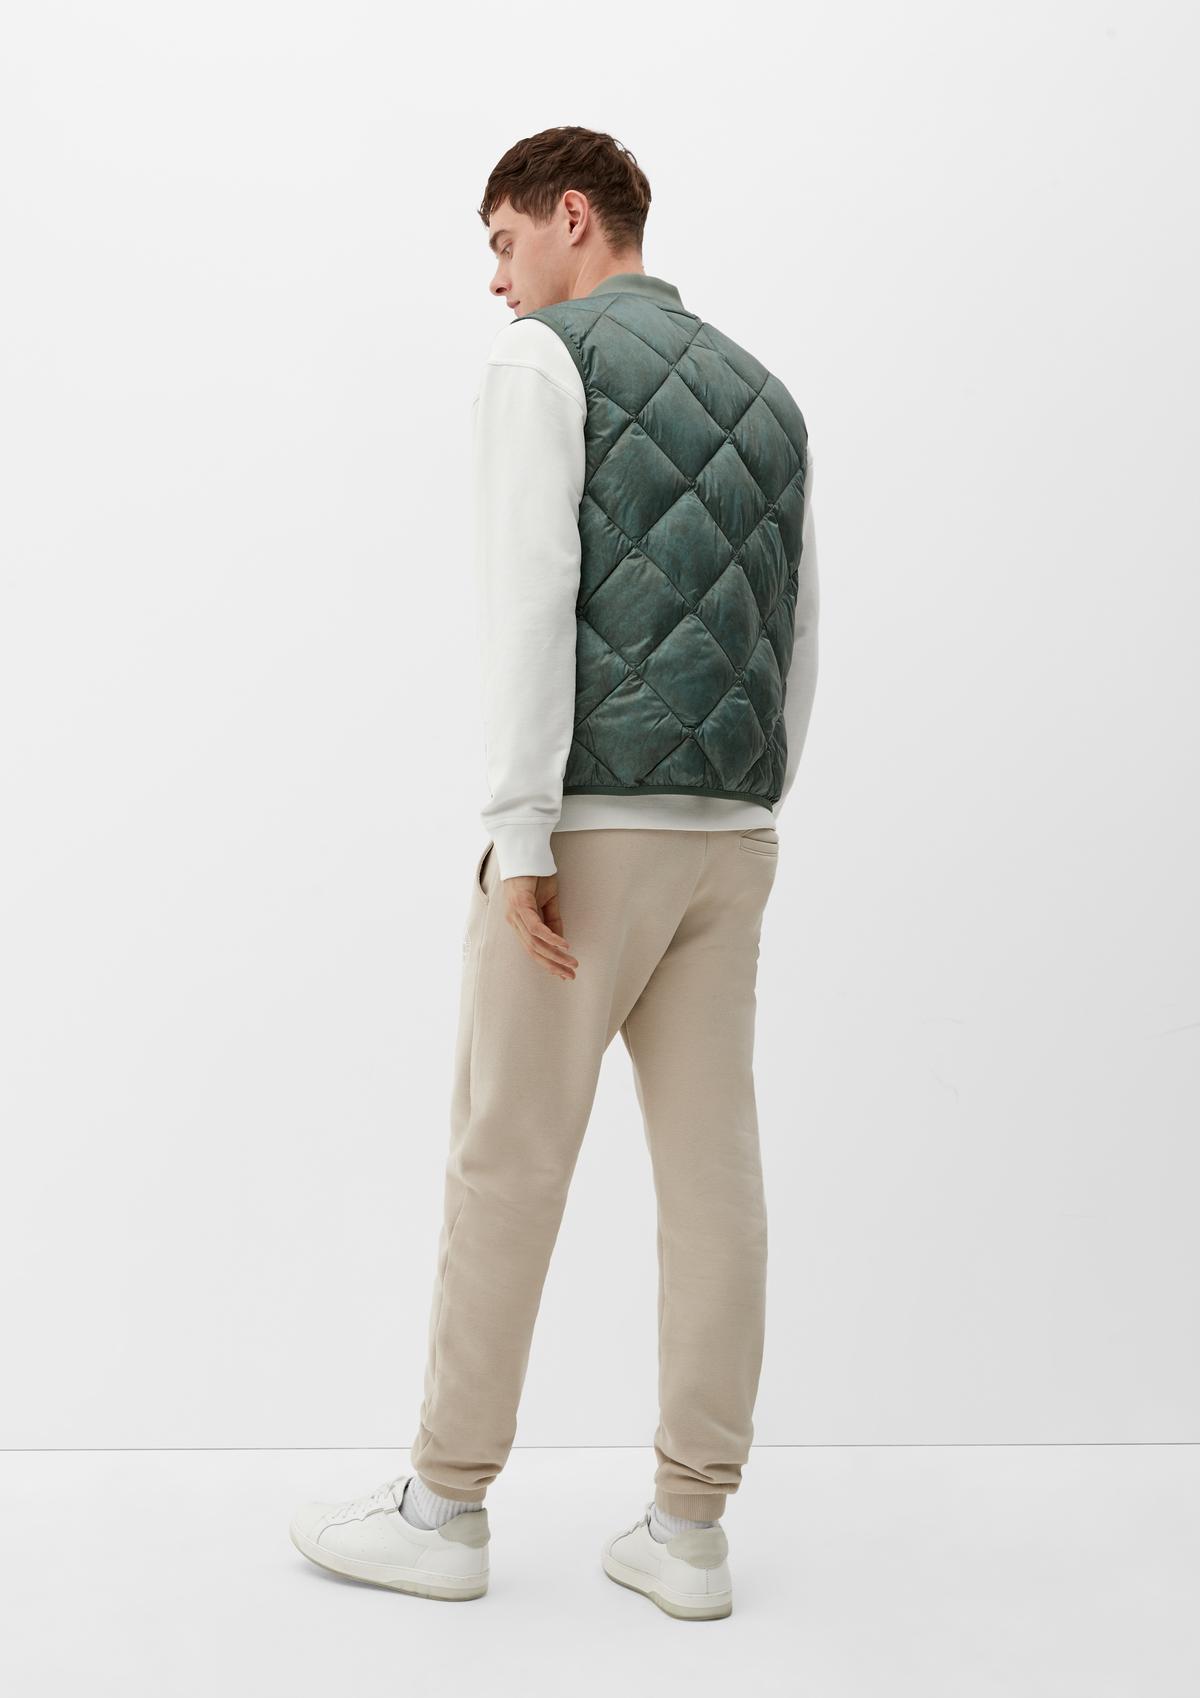 s.Oliver Quilted body warmer